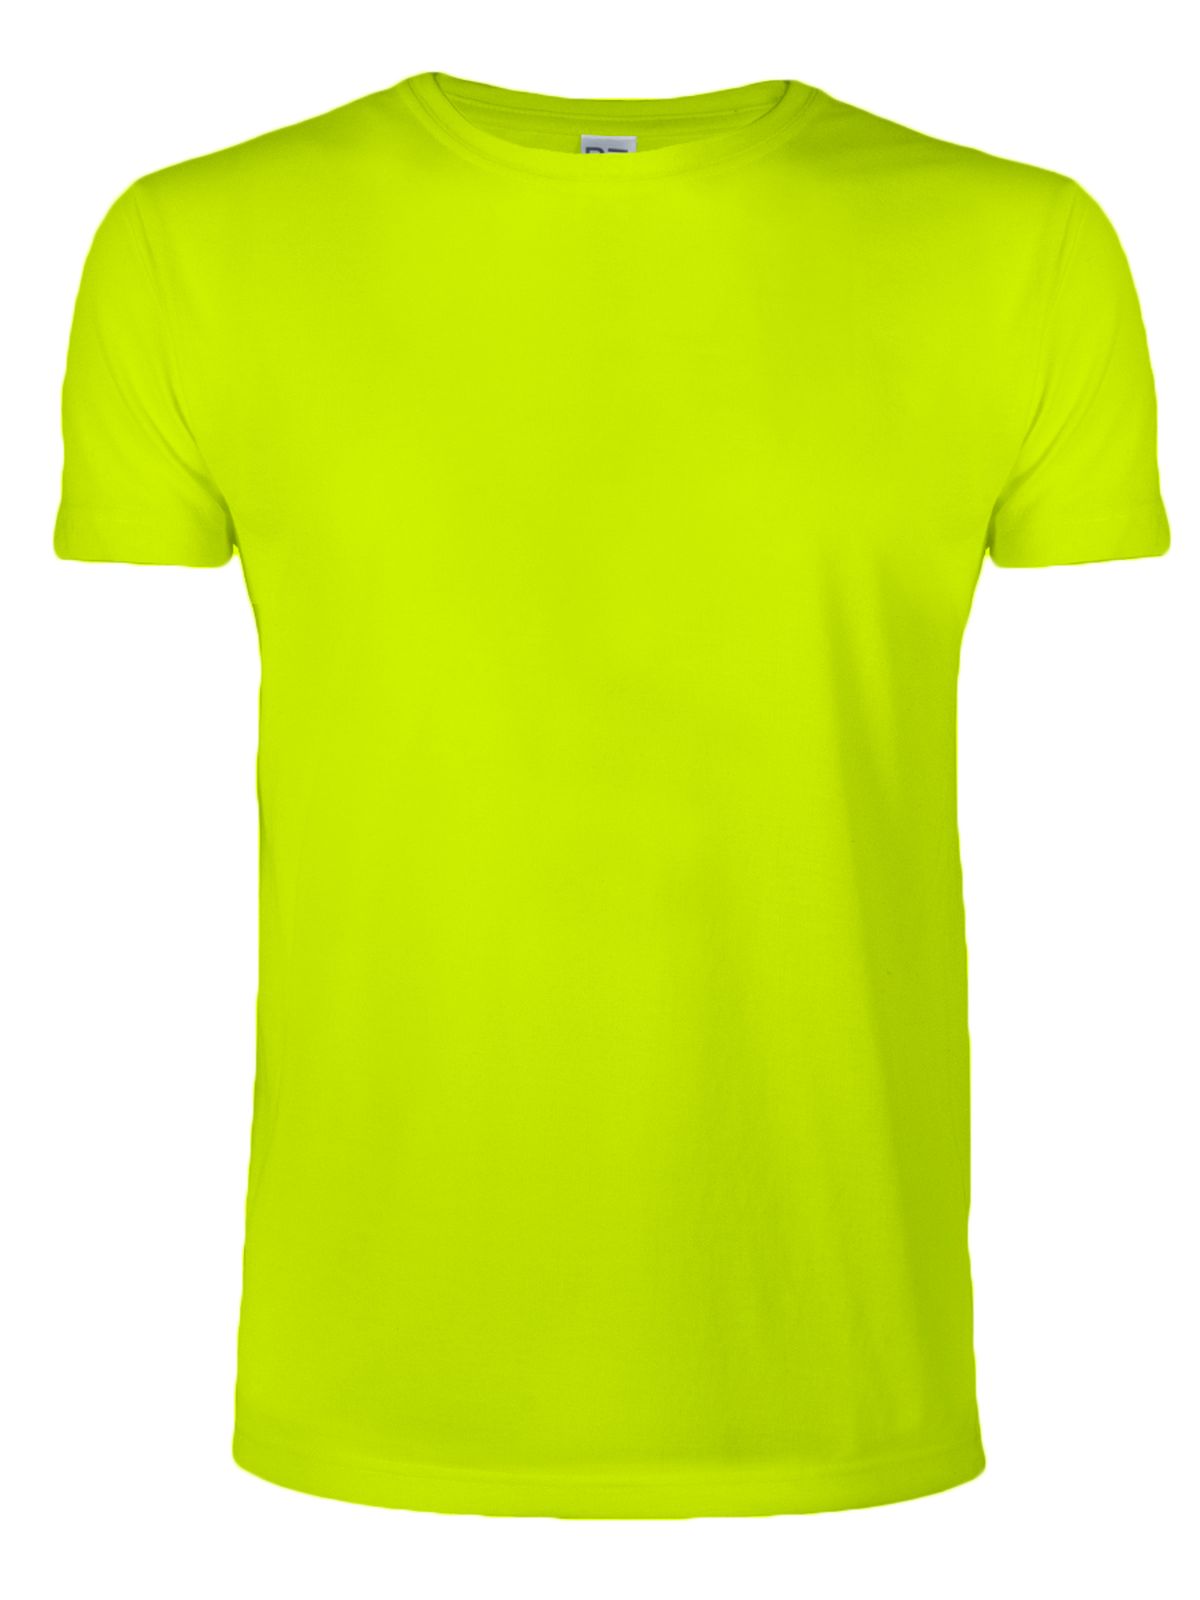 evolution-cotton-touch-yellow-fluo.webp